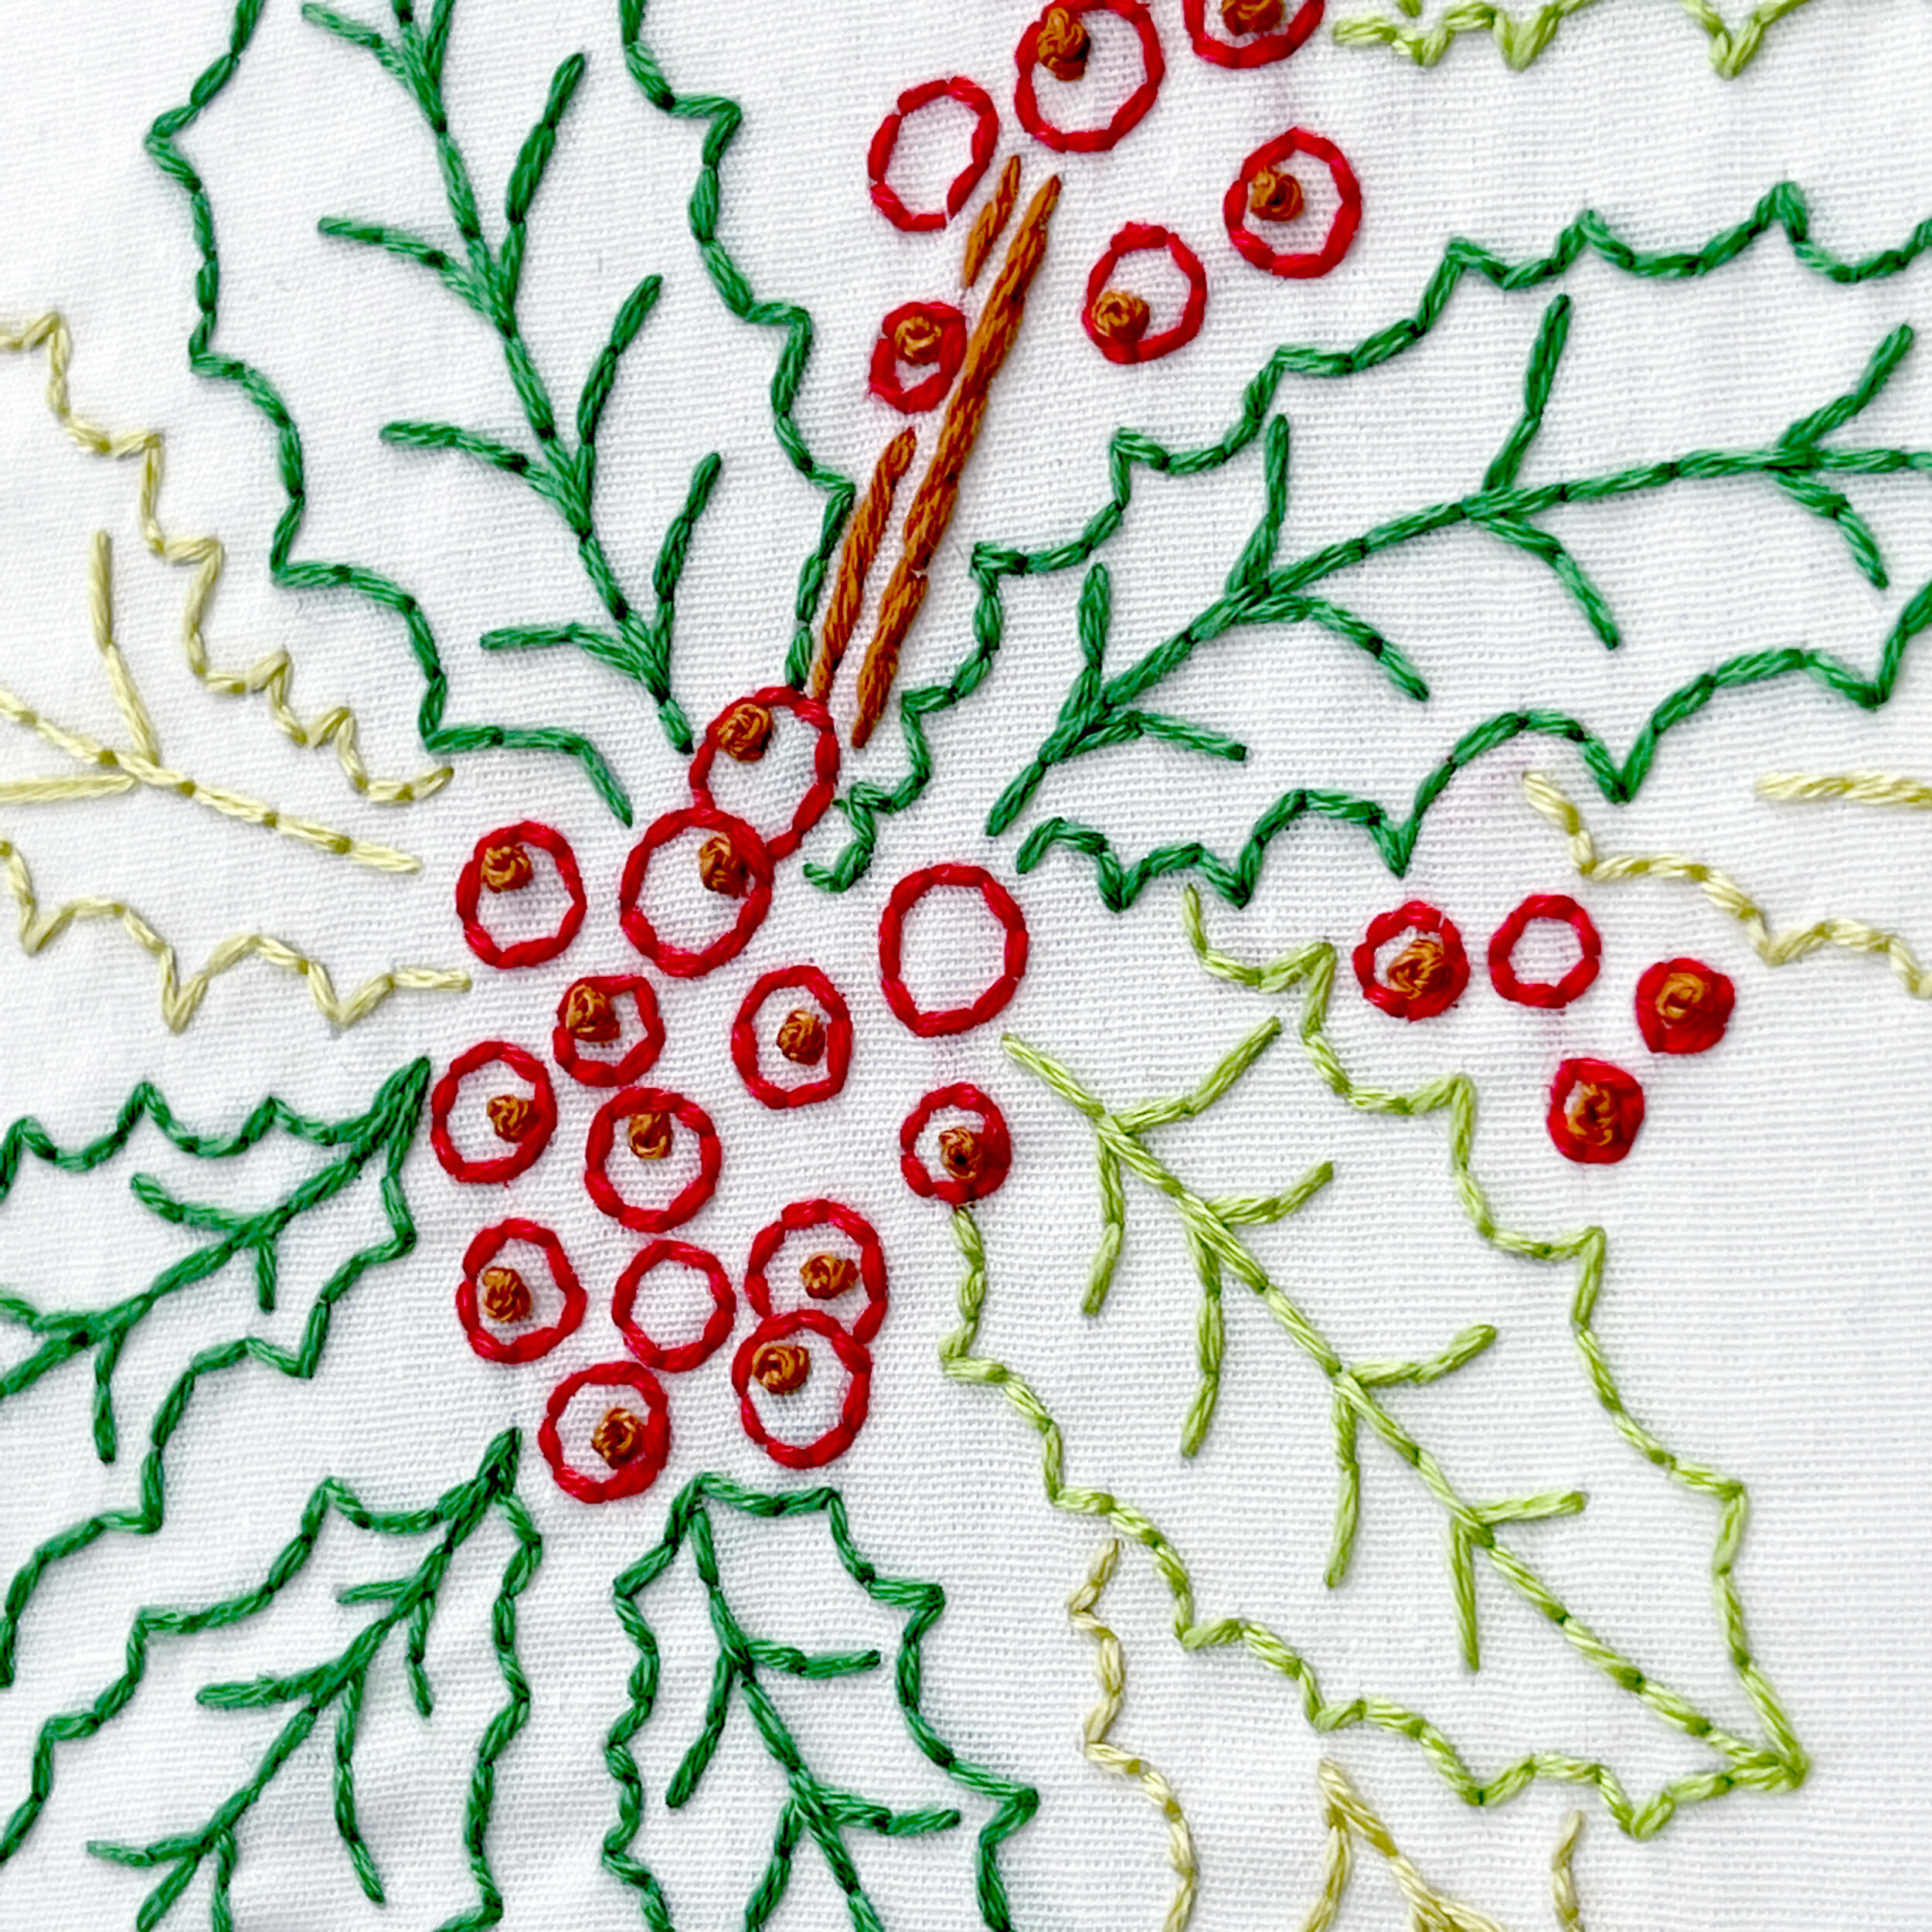 Close up of red berries and green leaves embroidered in the Holly pattern